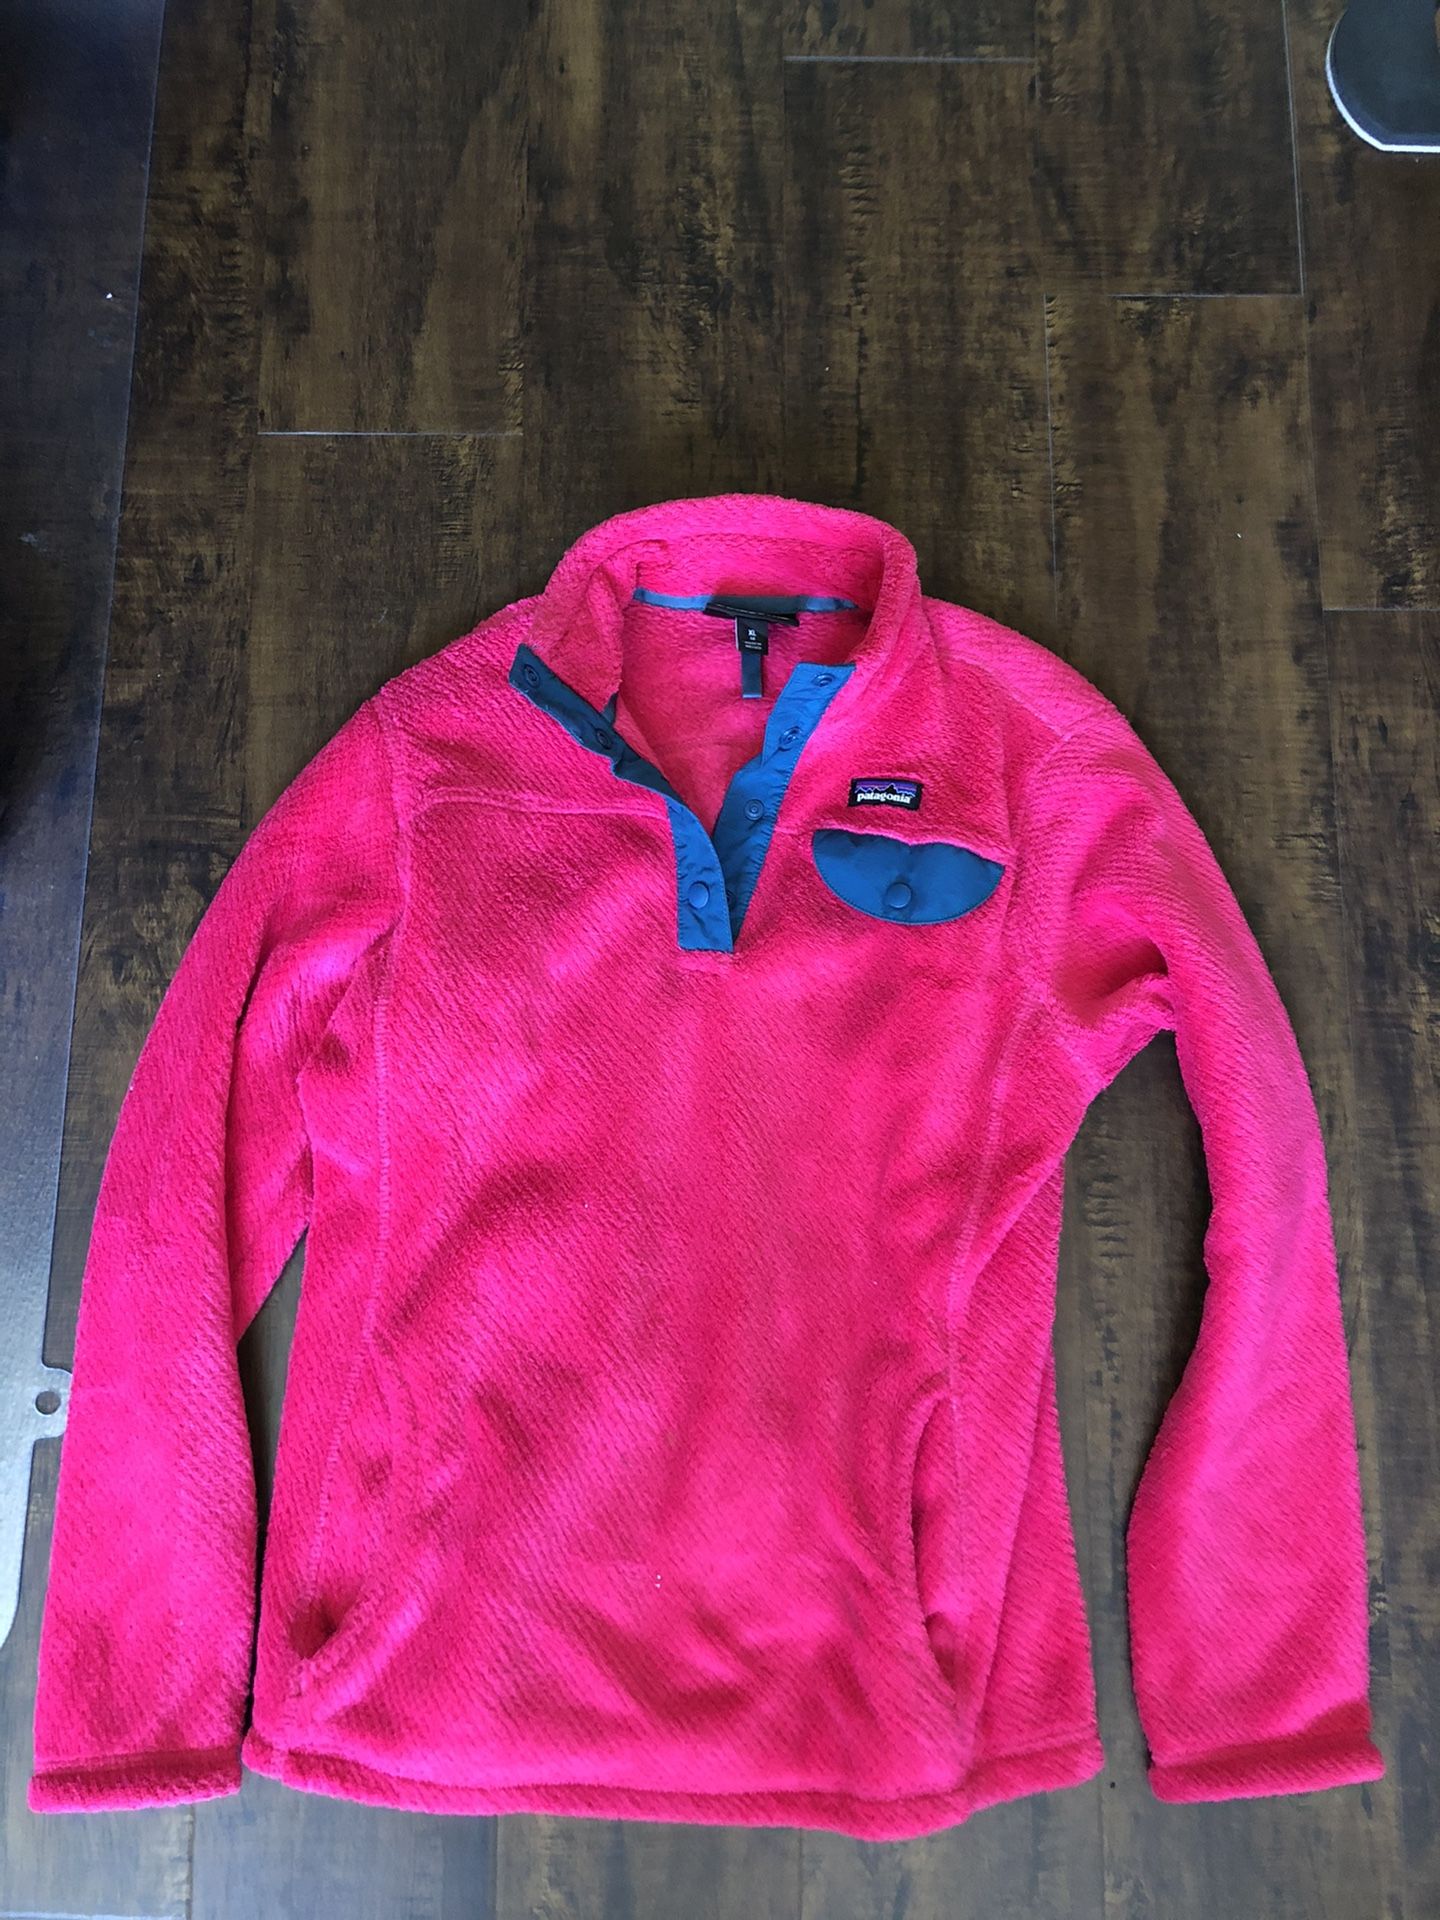 Patagonia girls size large-14 berry color